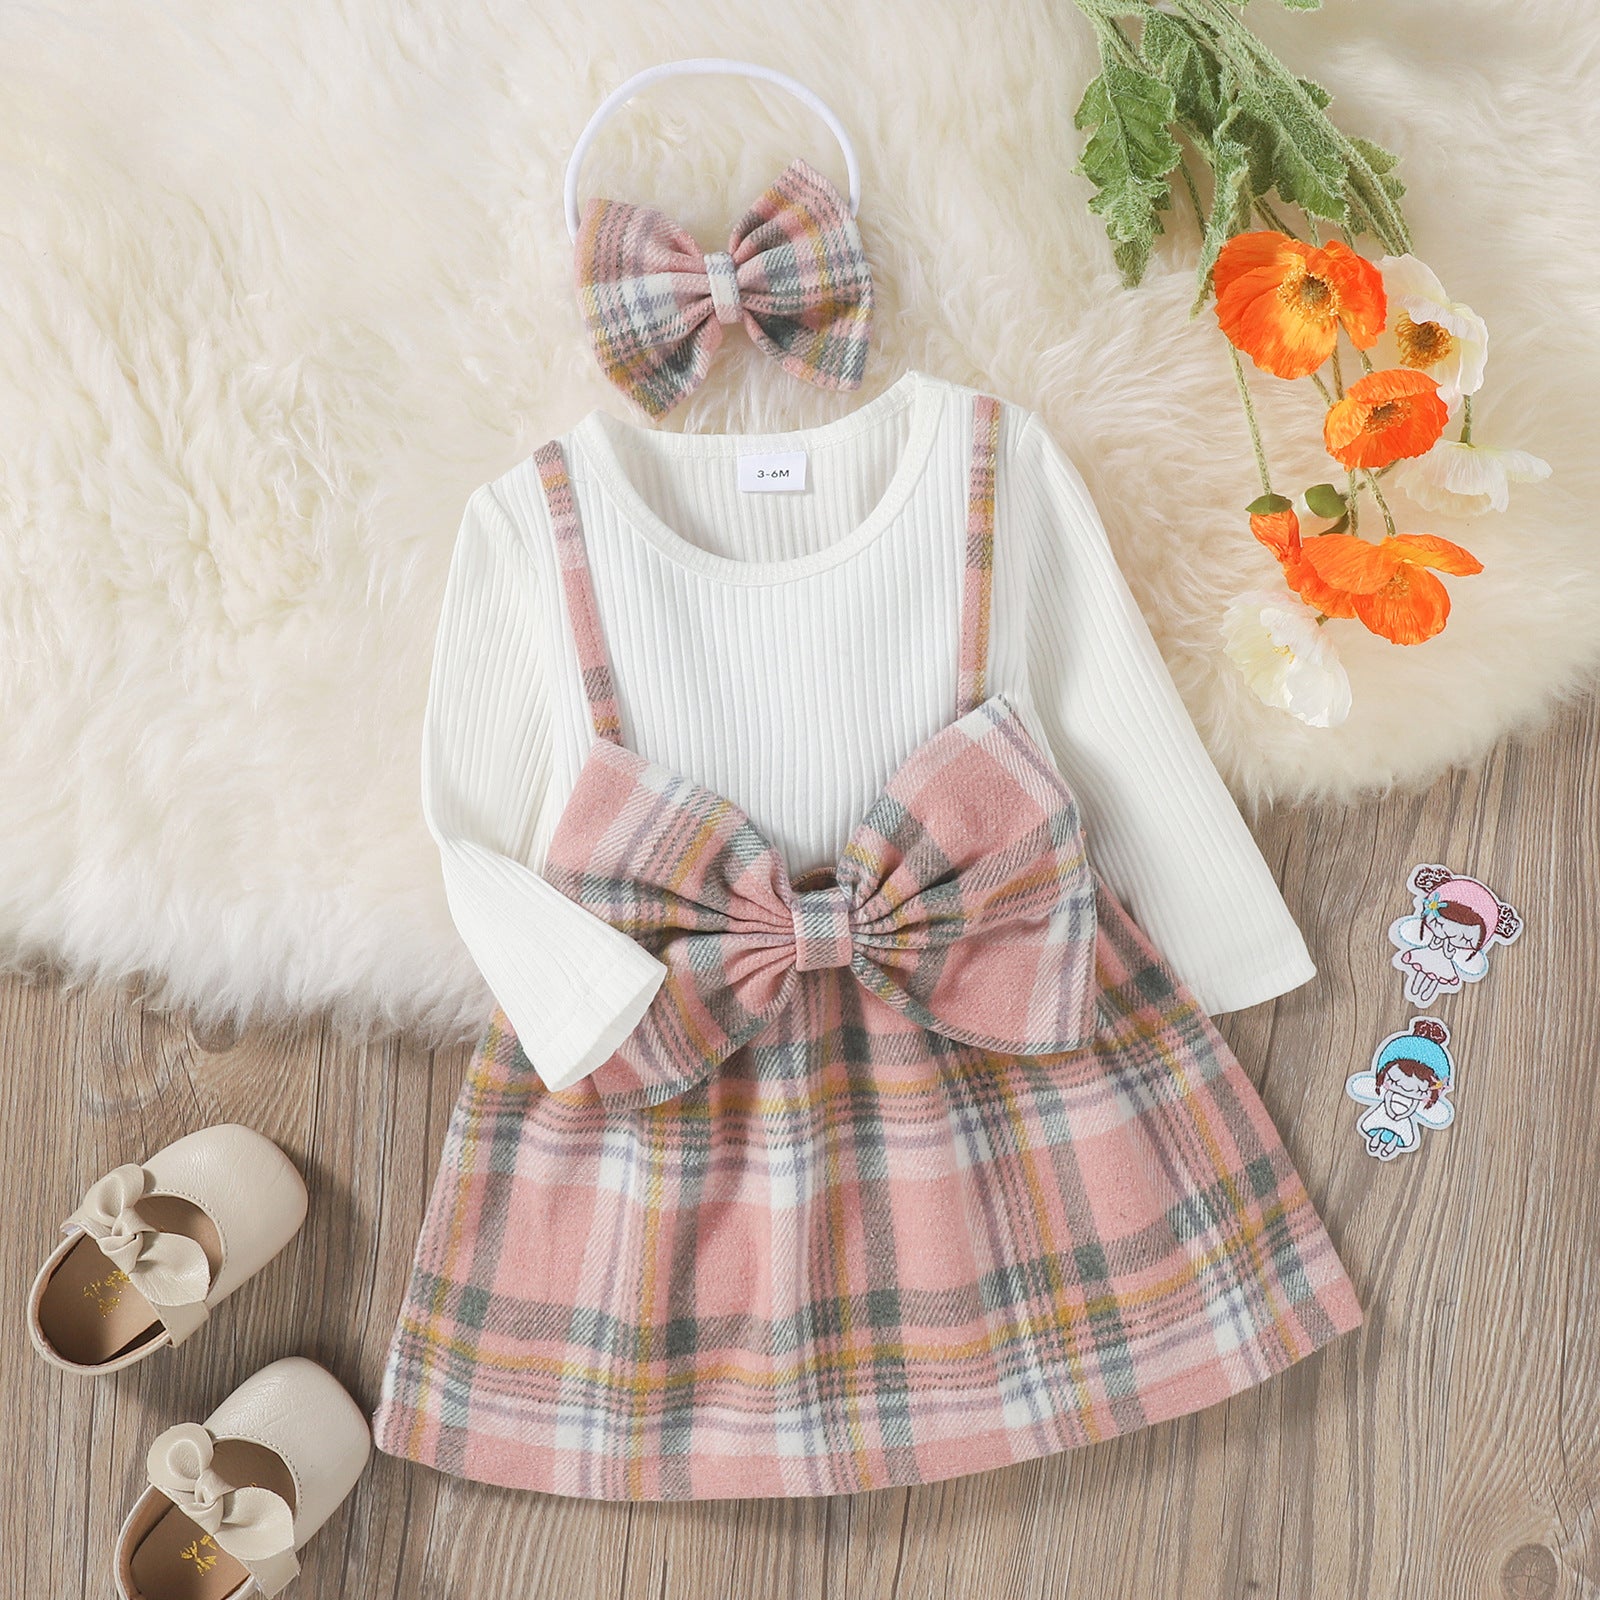 Stylish Plaid Bow Two-Piece Suit for Girls